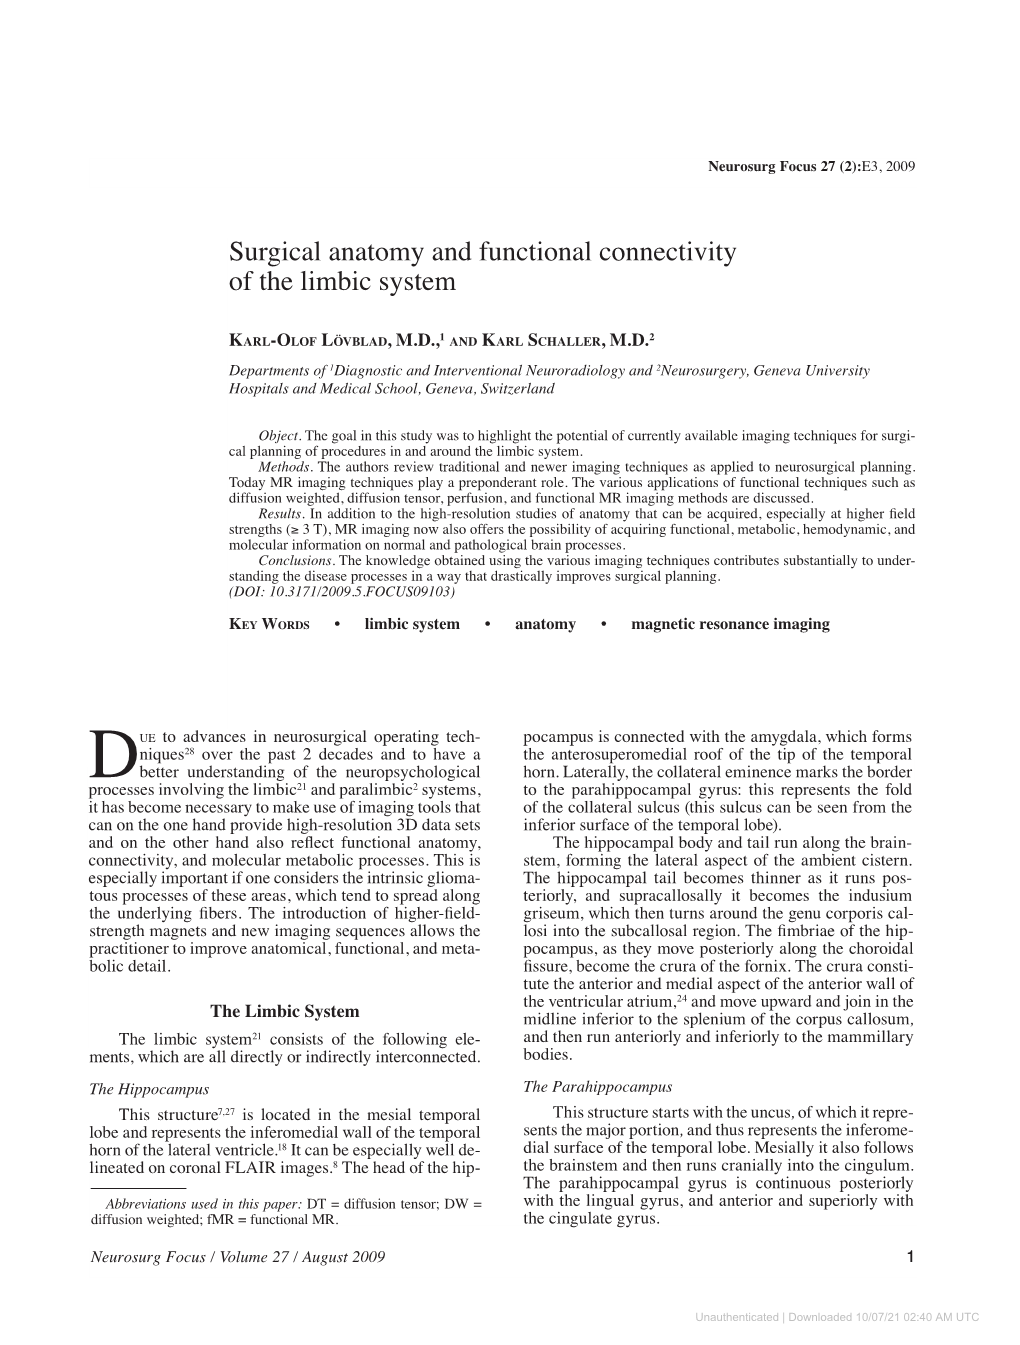 Surgical Anatomy and Functional Connectivity of the Limbic System